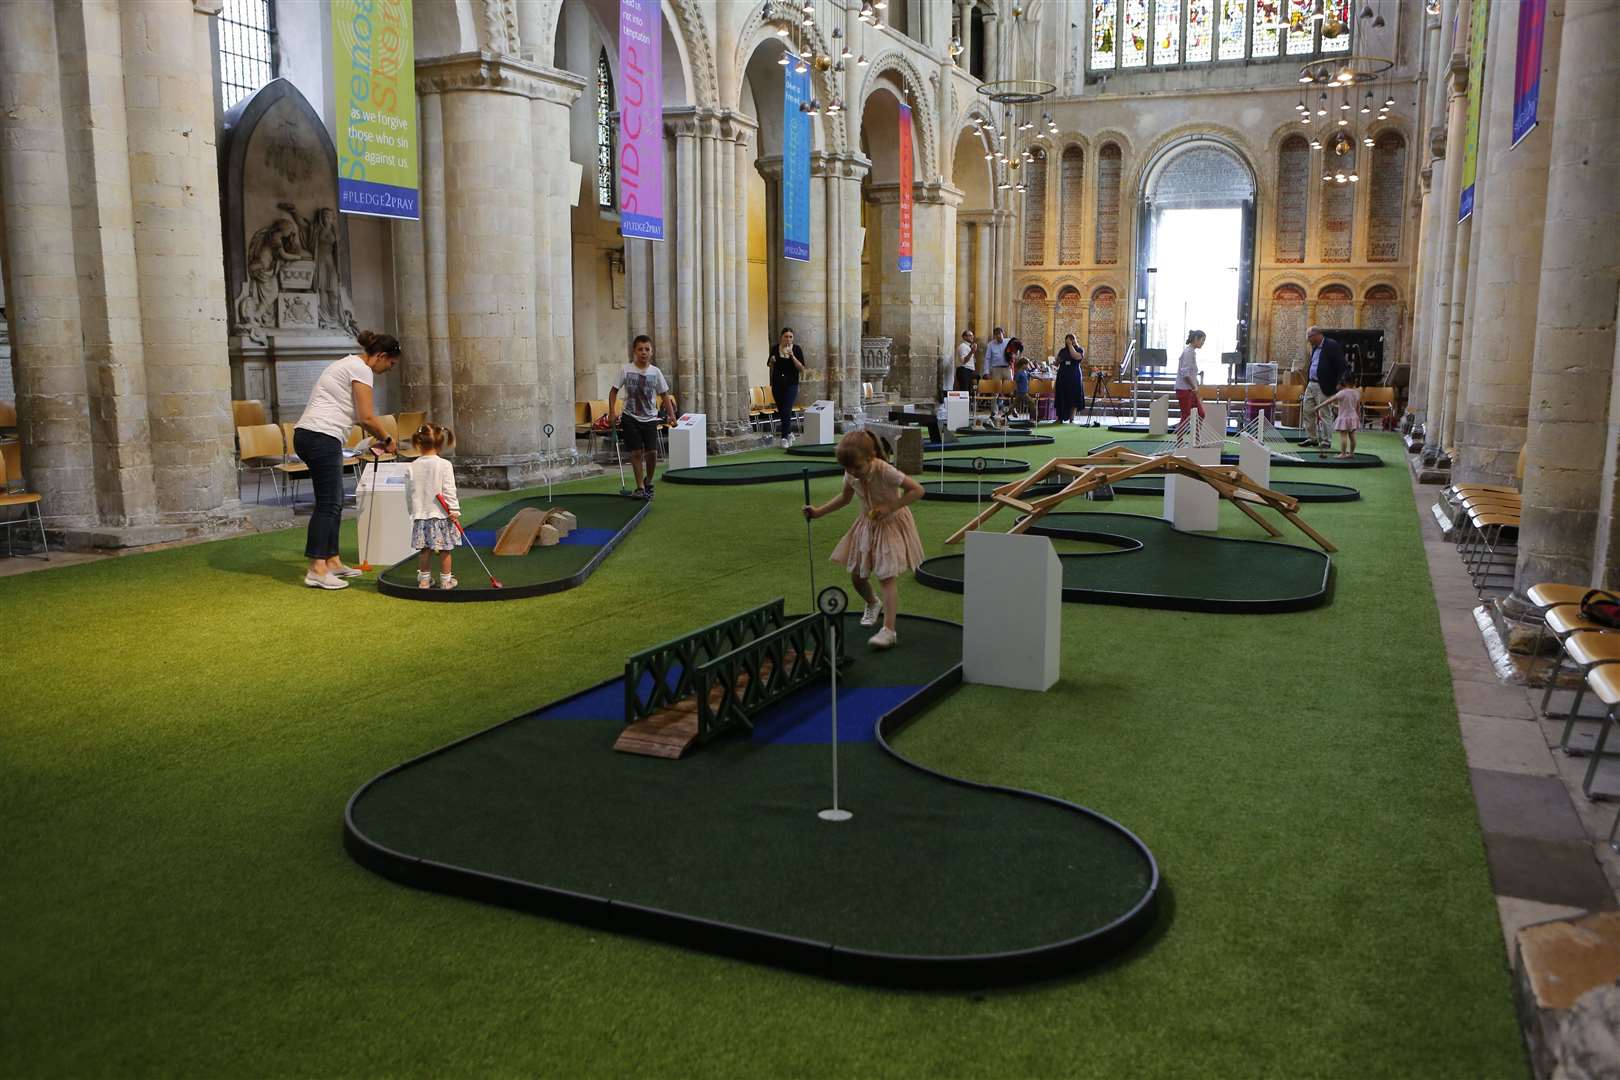 Rochester Cathedral crazy golf has proved very popular